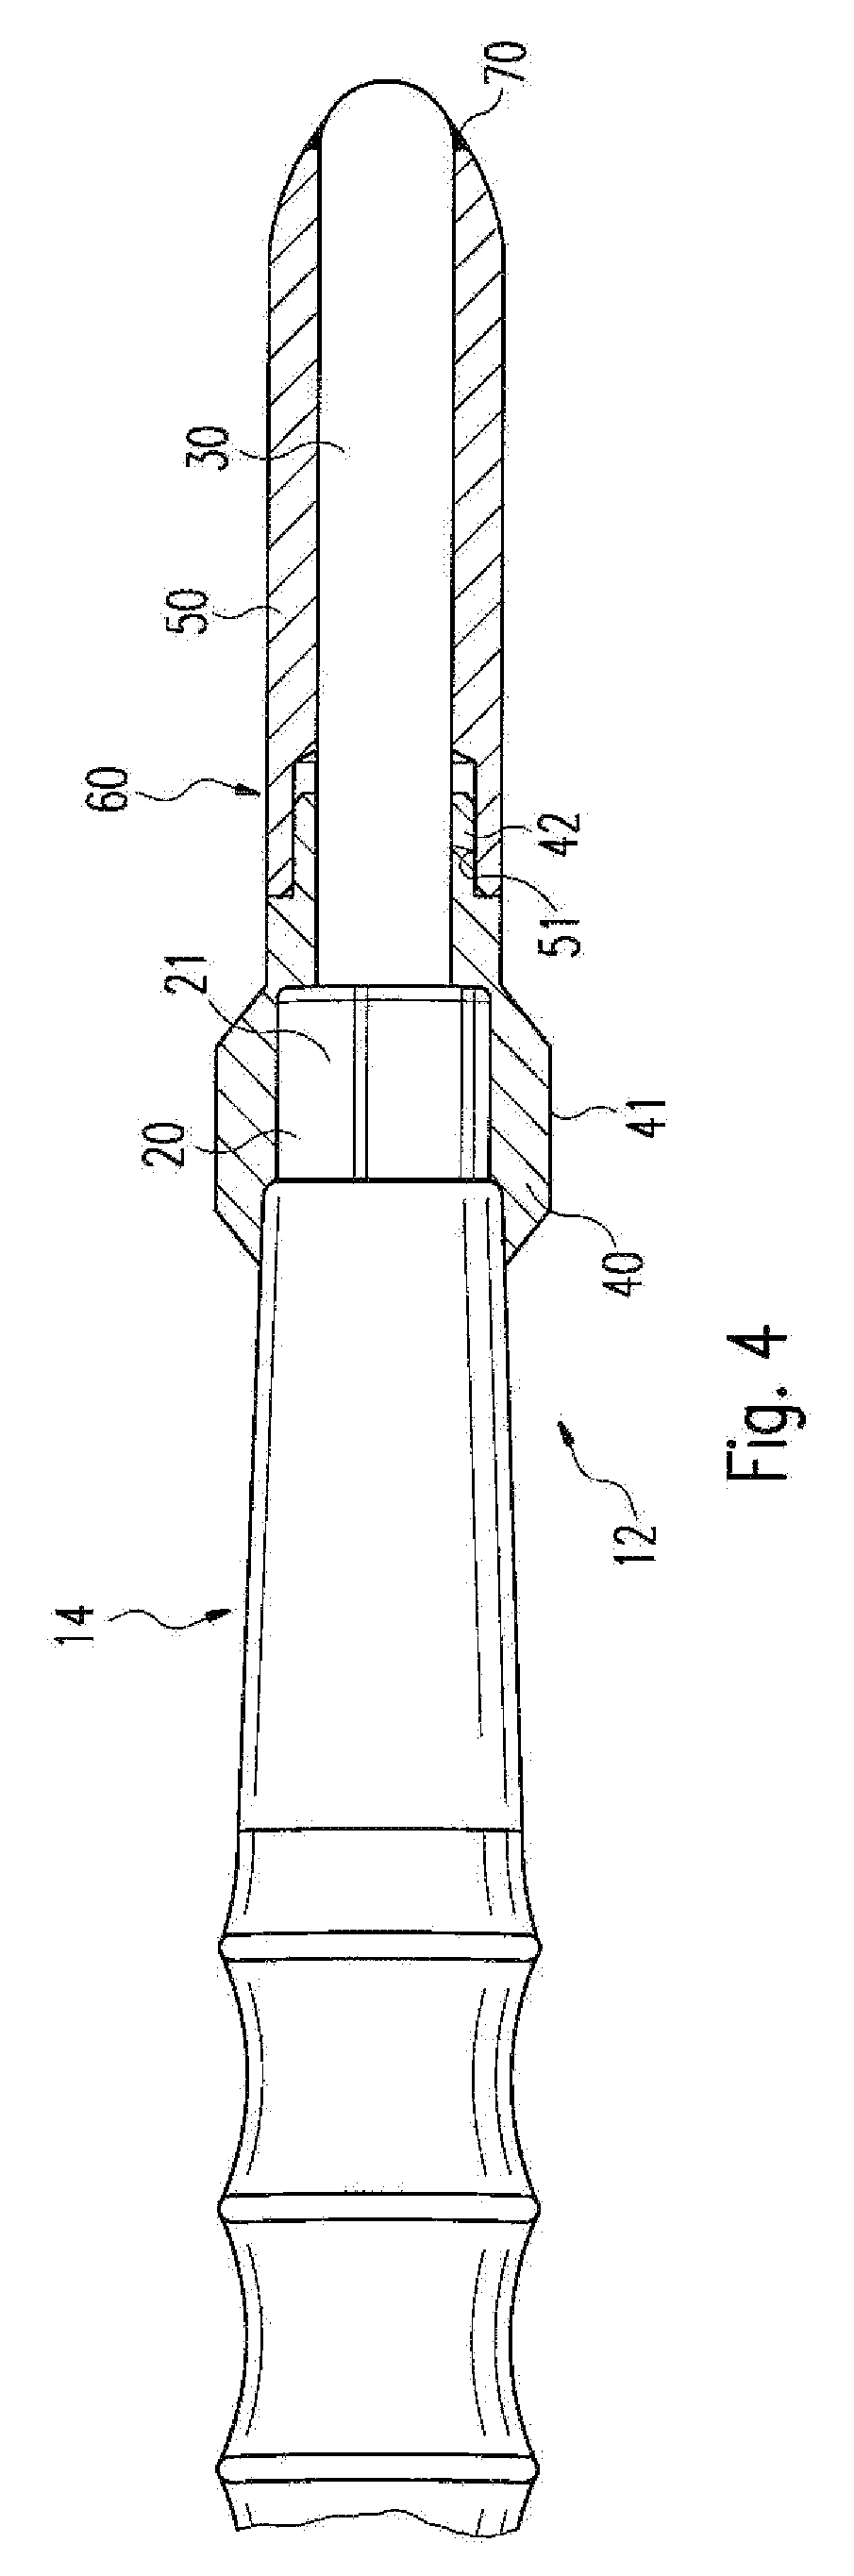 Adapter Device